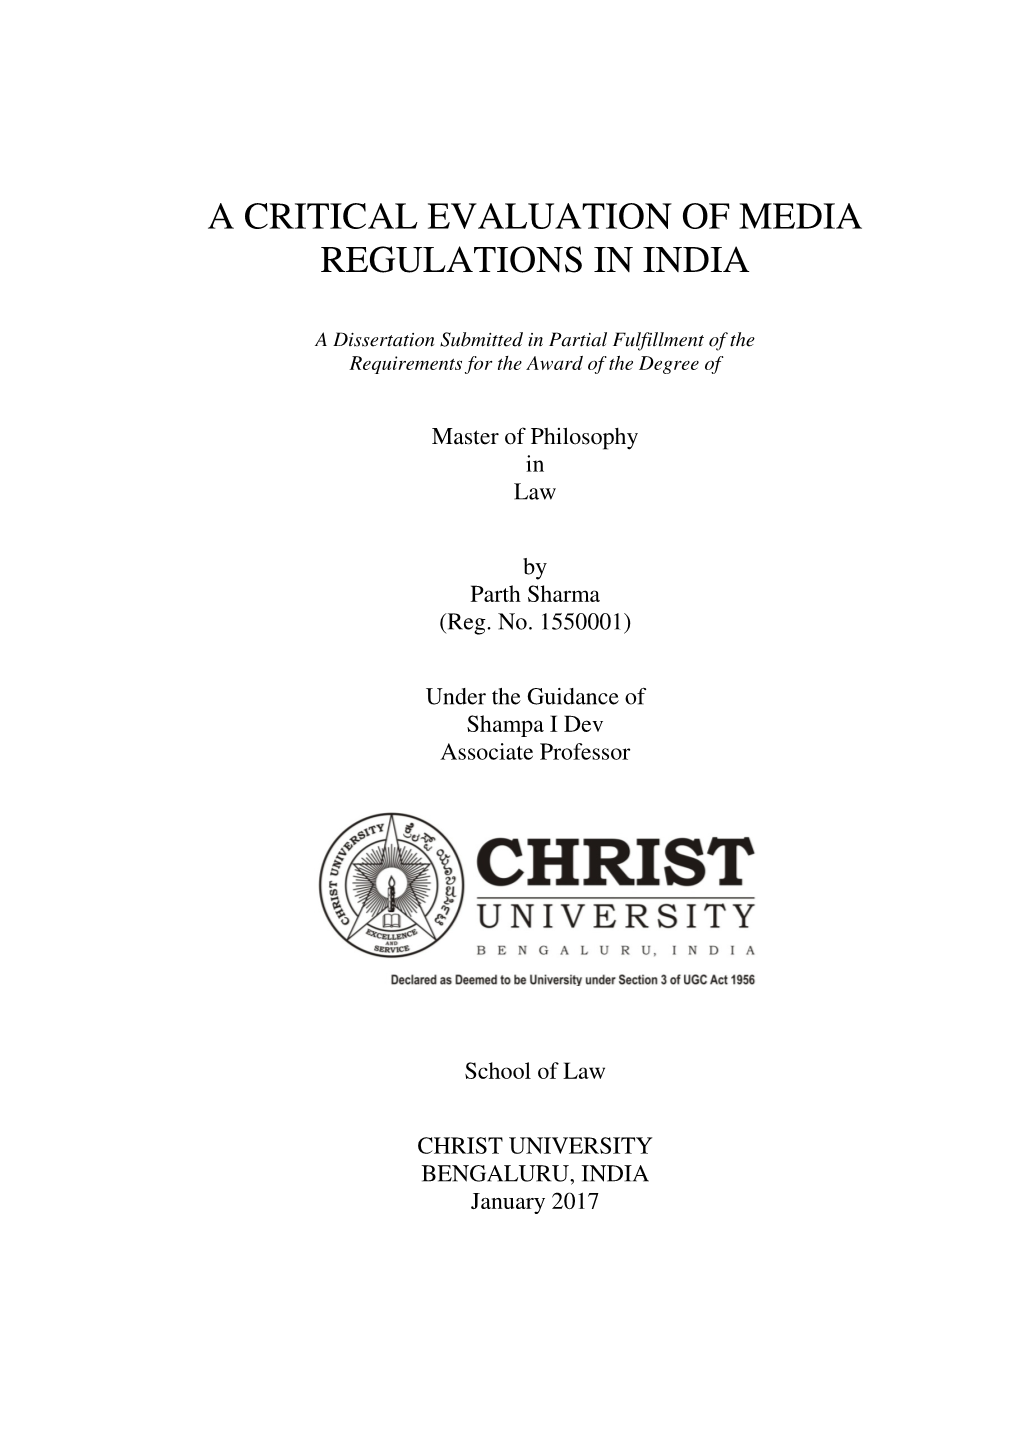 A Critical Evaluation of Media Regulations in India